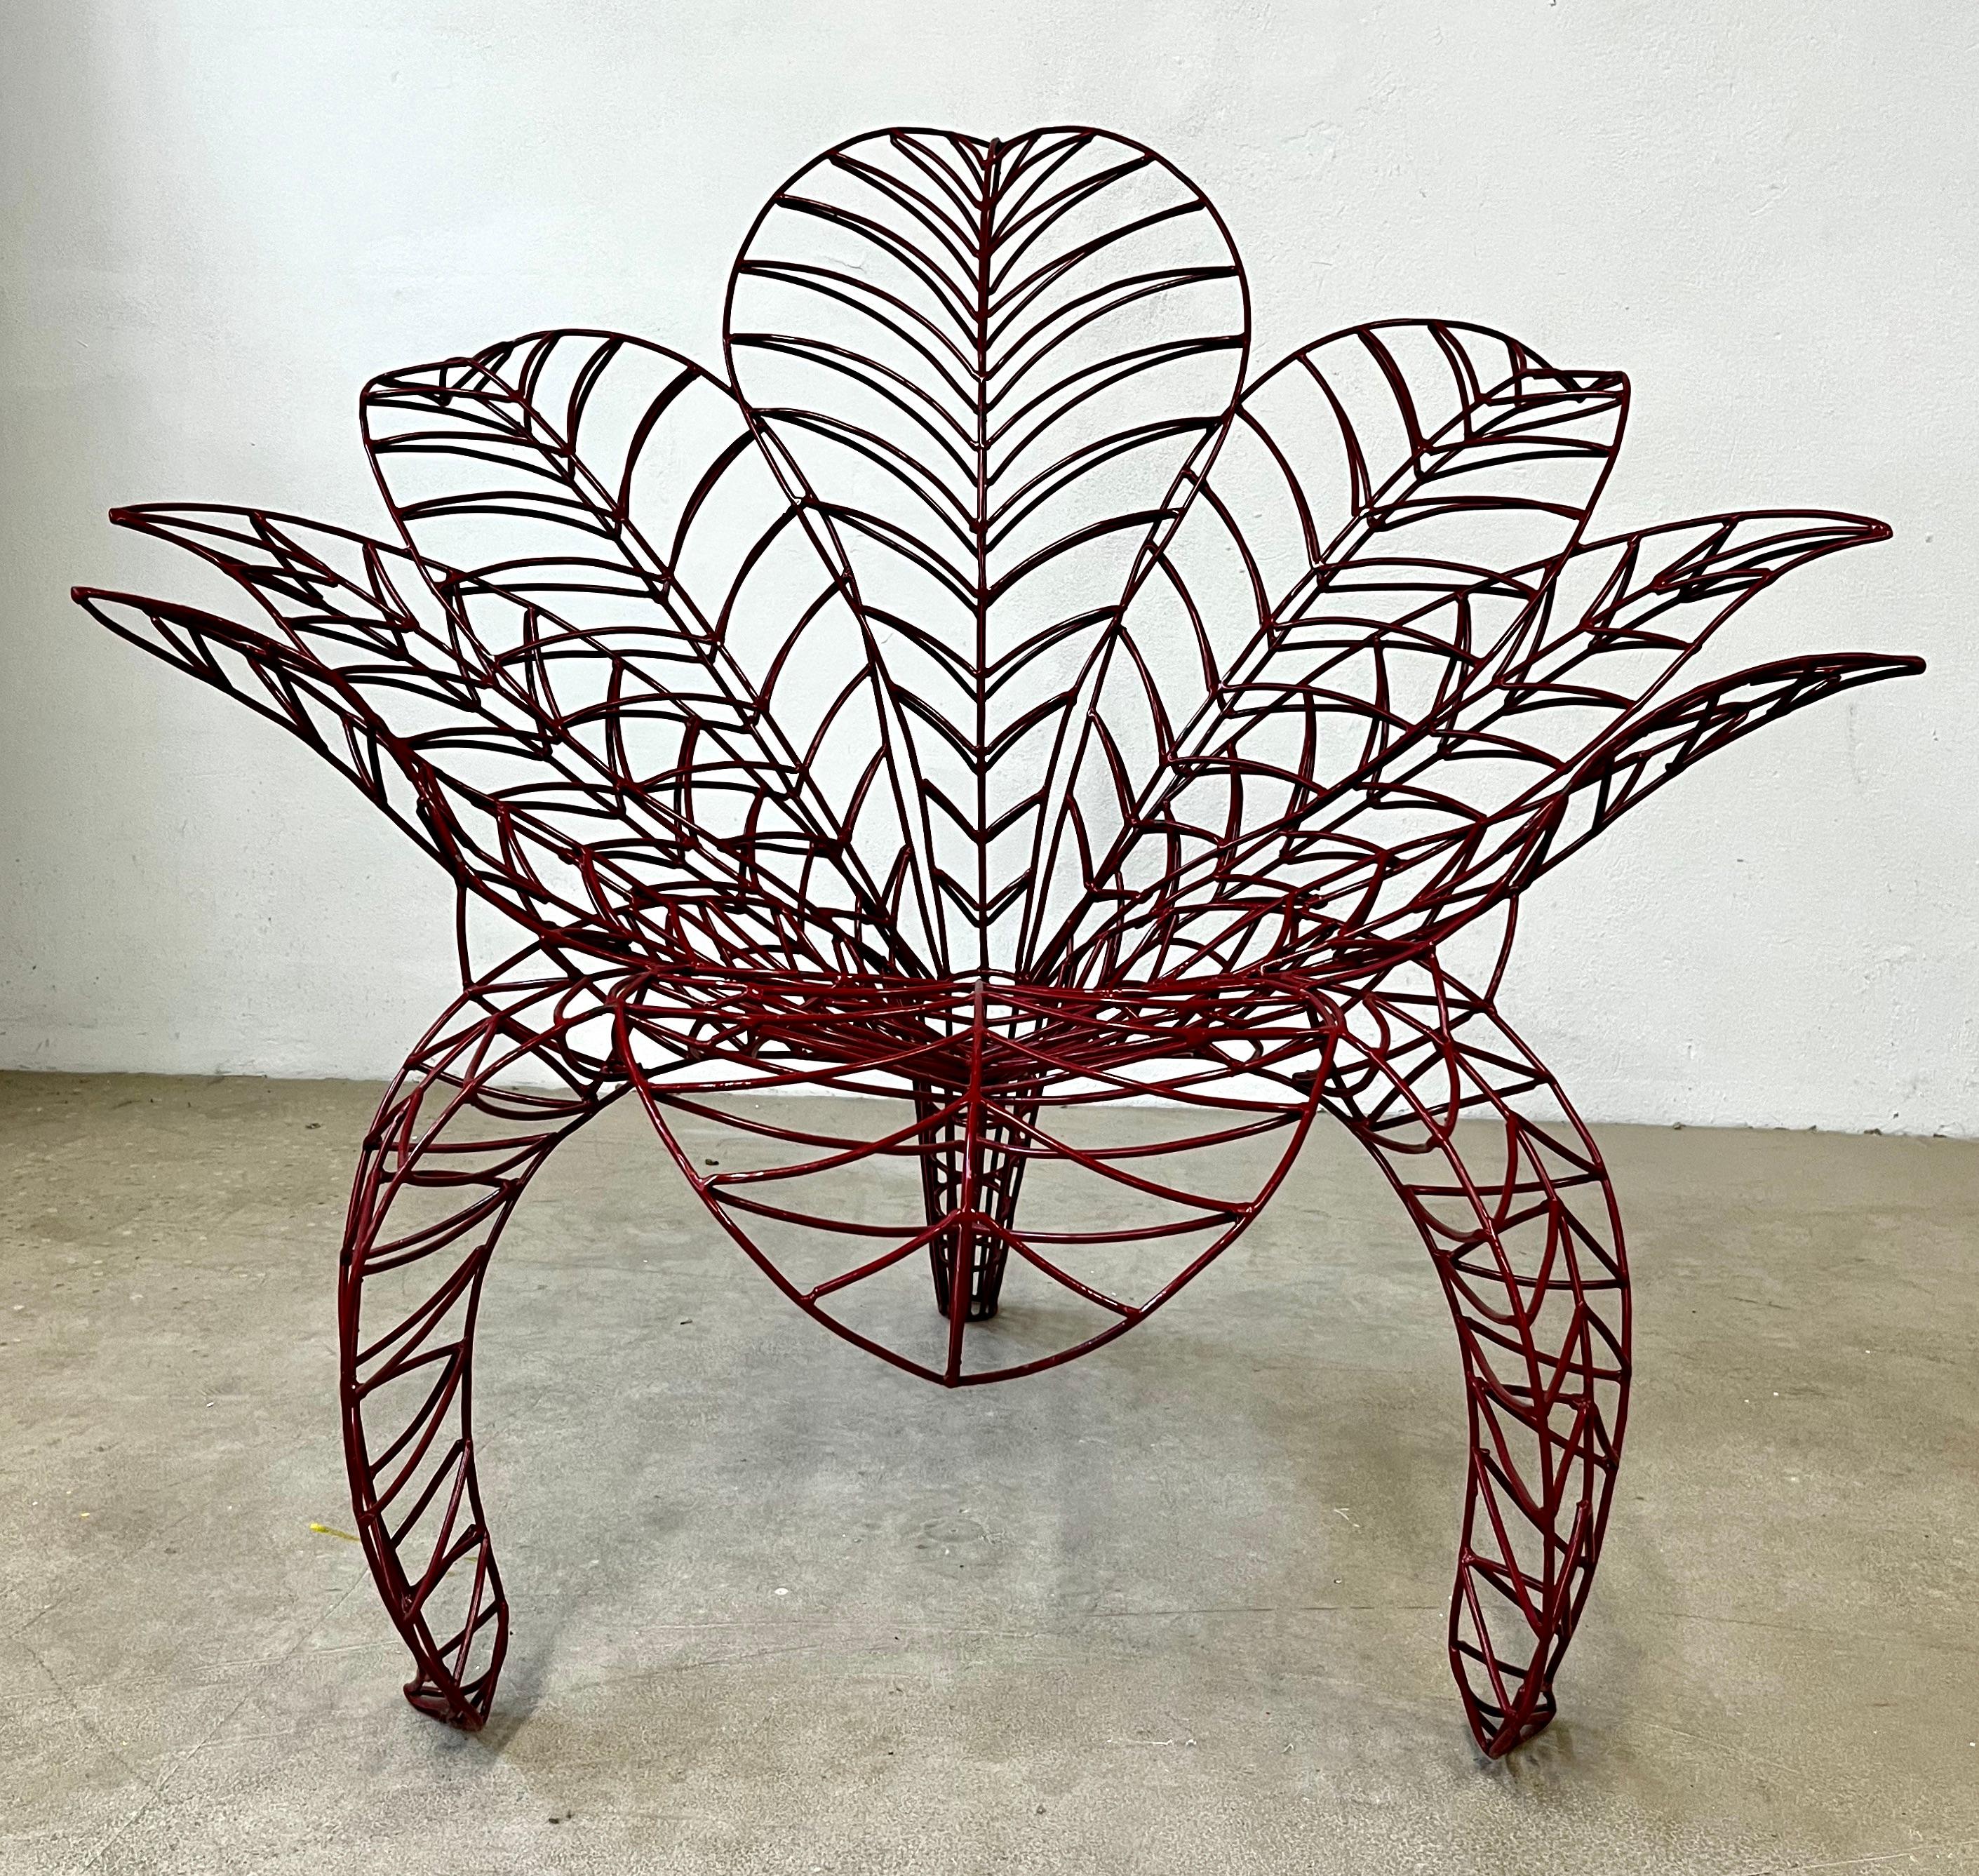 Fun minimalist armchair, a unique organic modern design inspired by nature, manufactured and signed by the Italian artist, Anacleto Spazzapan (Luino, Italy - 1943). The handmade structure in the shape of a blossoming flower is made of hand-welded